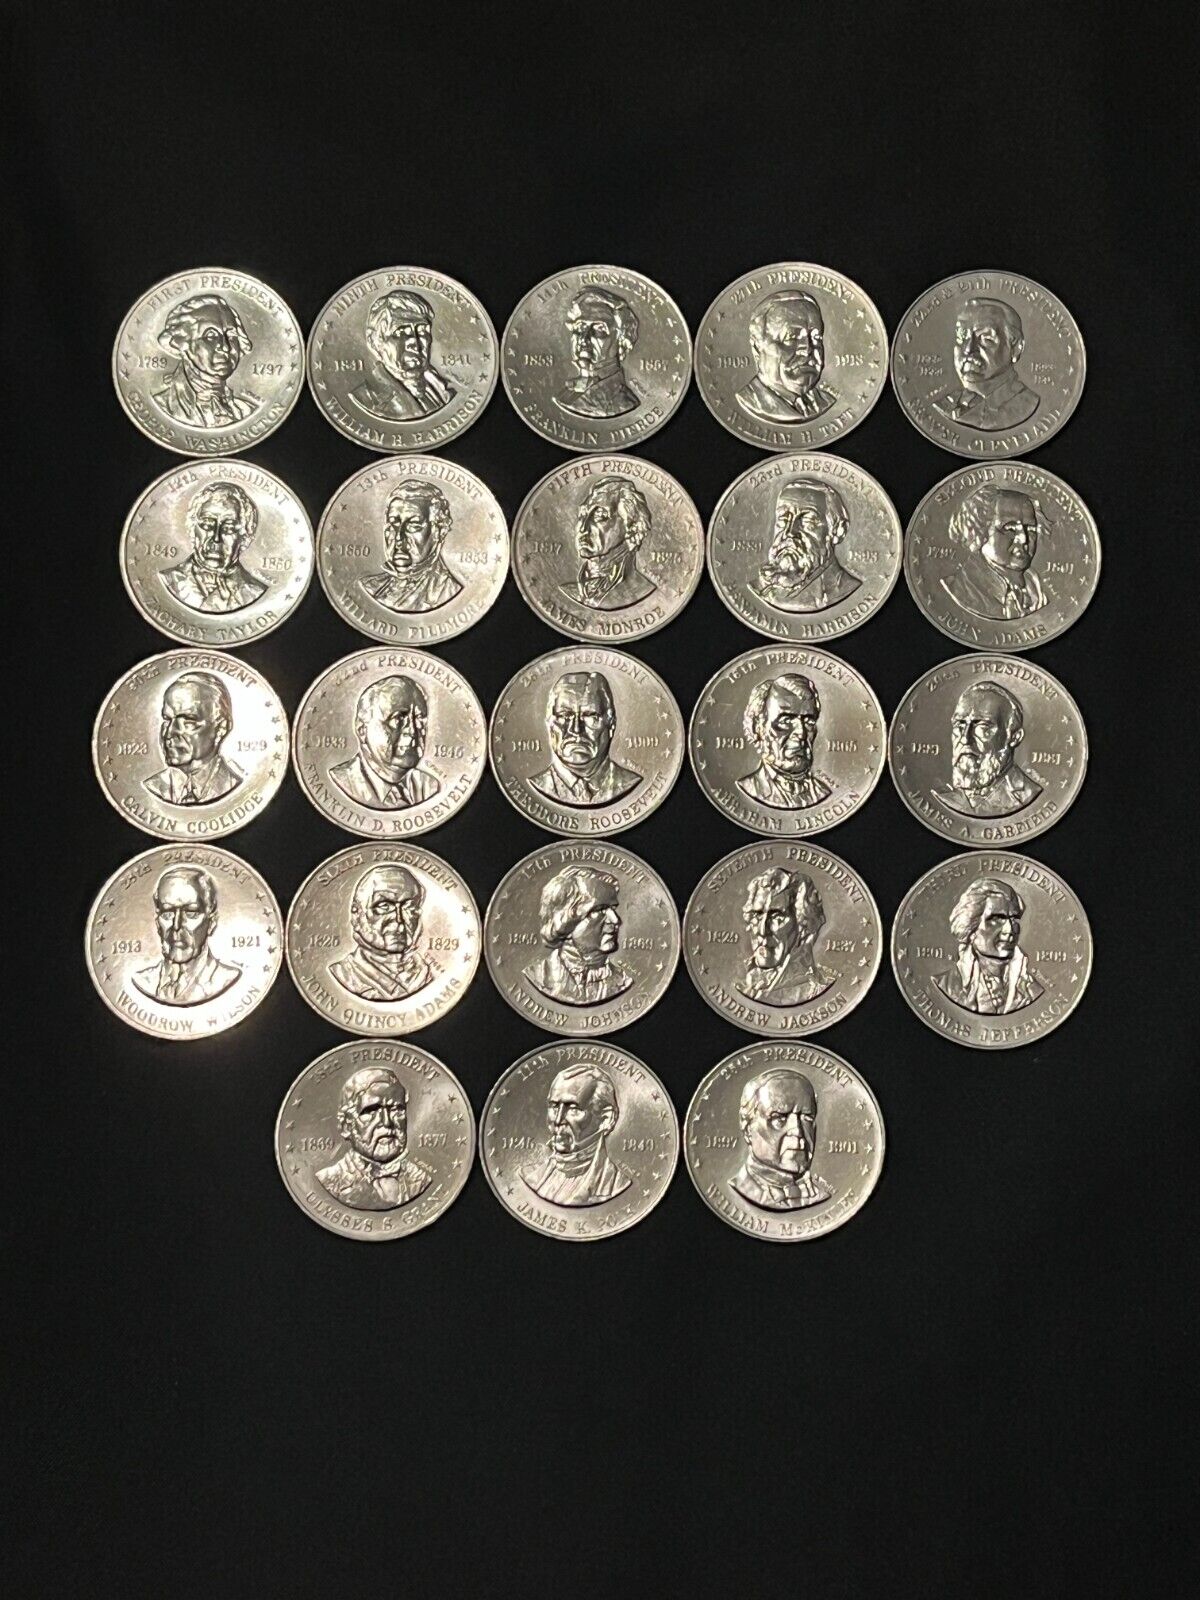 SHELL'S 1968 MR. PRESIDENT COIN GAME 23 DIFFERENT COINS